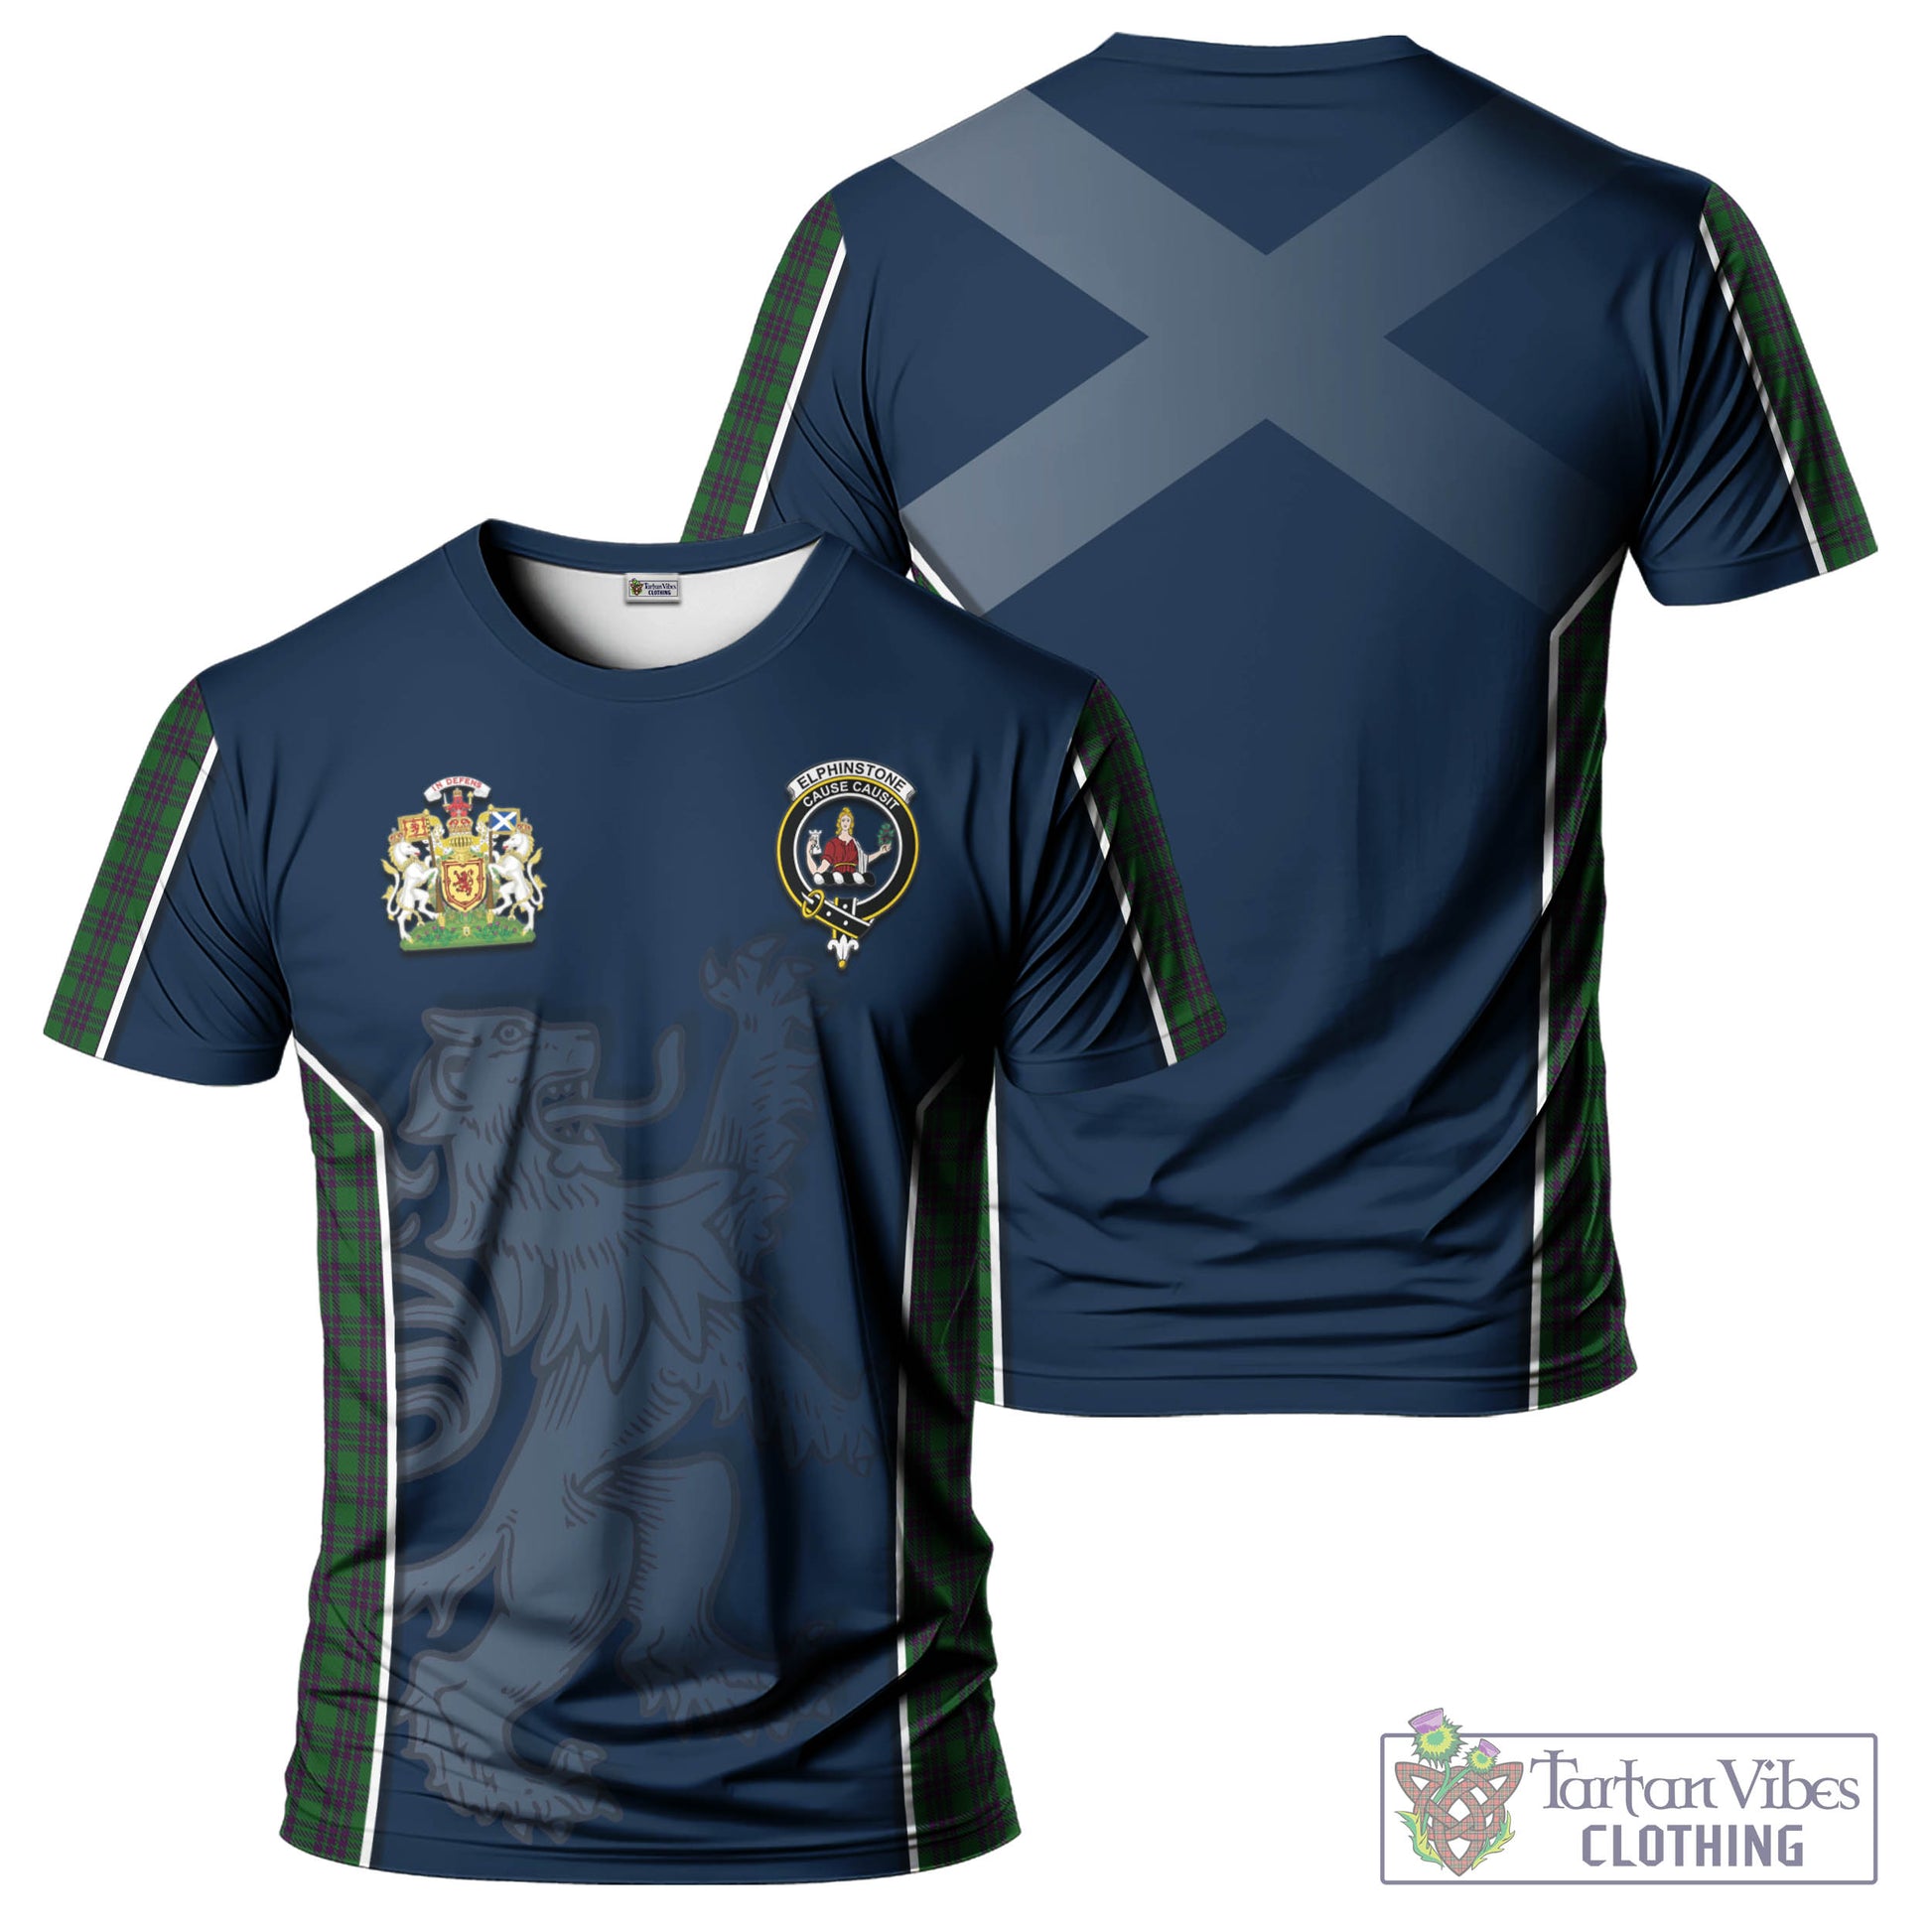 Tartan Vibes Clothing Elphinstone Tartan T-Shirt with Family Crest and Lion Rampant Vibes Sport Style